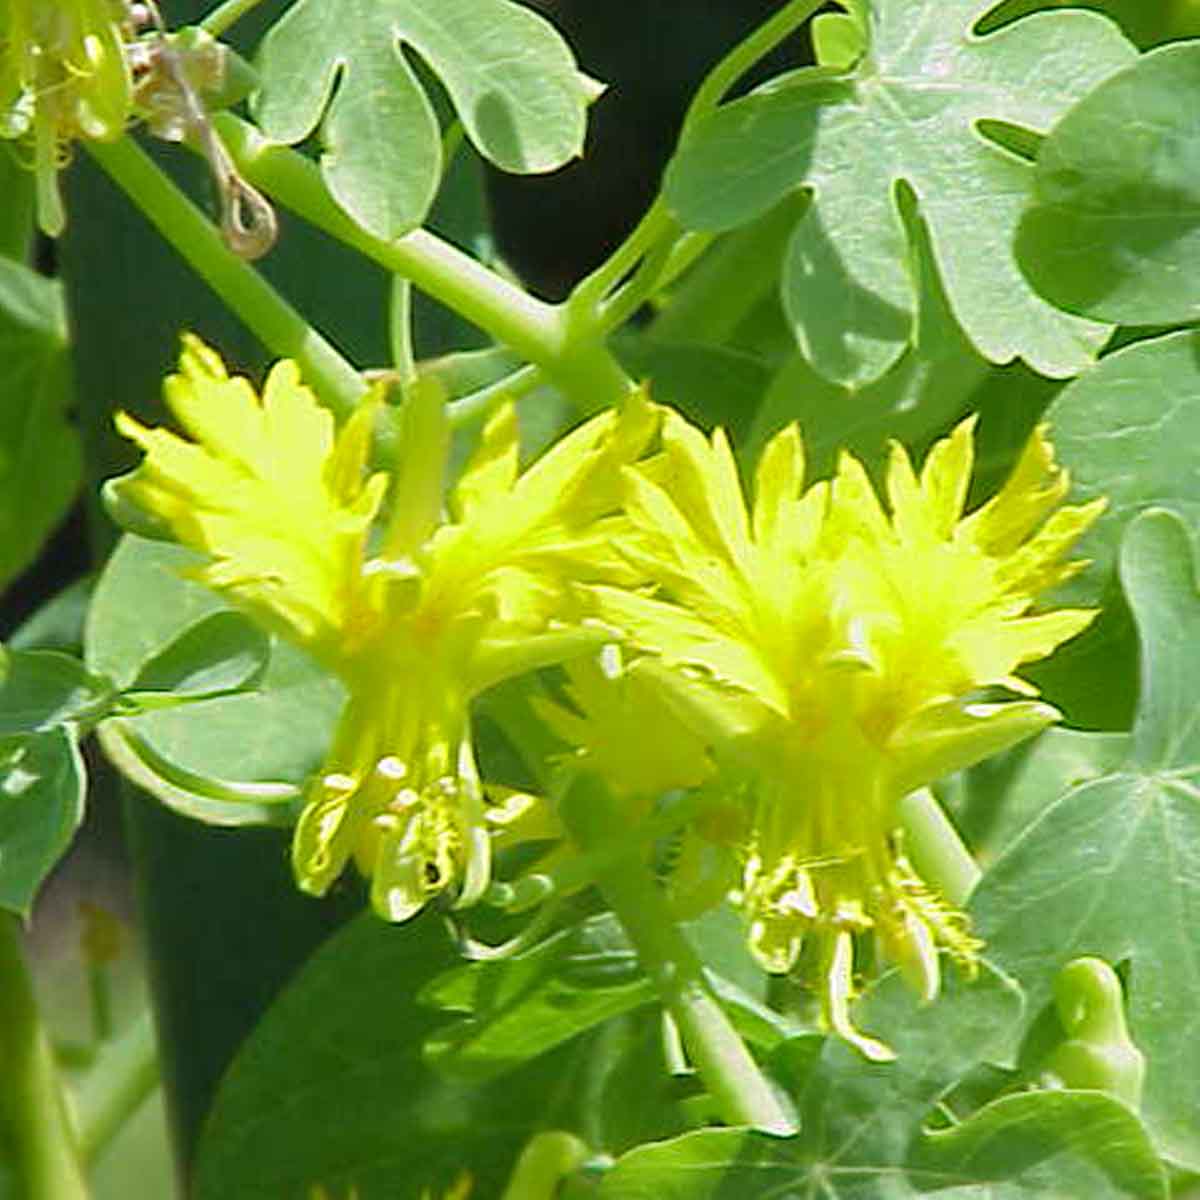 Yellow  flowers, the pedal thin and looks like a bird in flight.